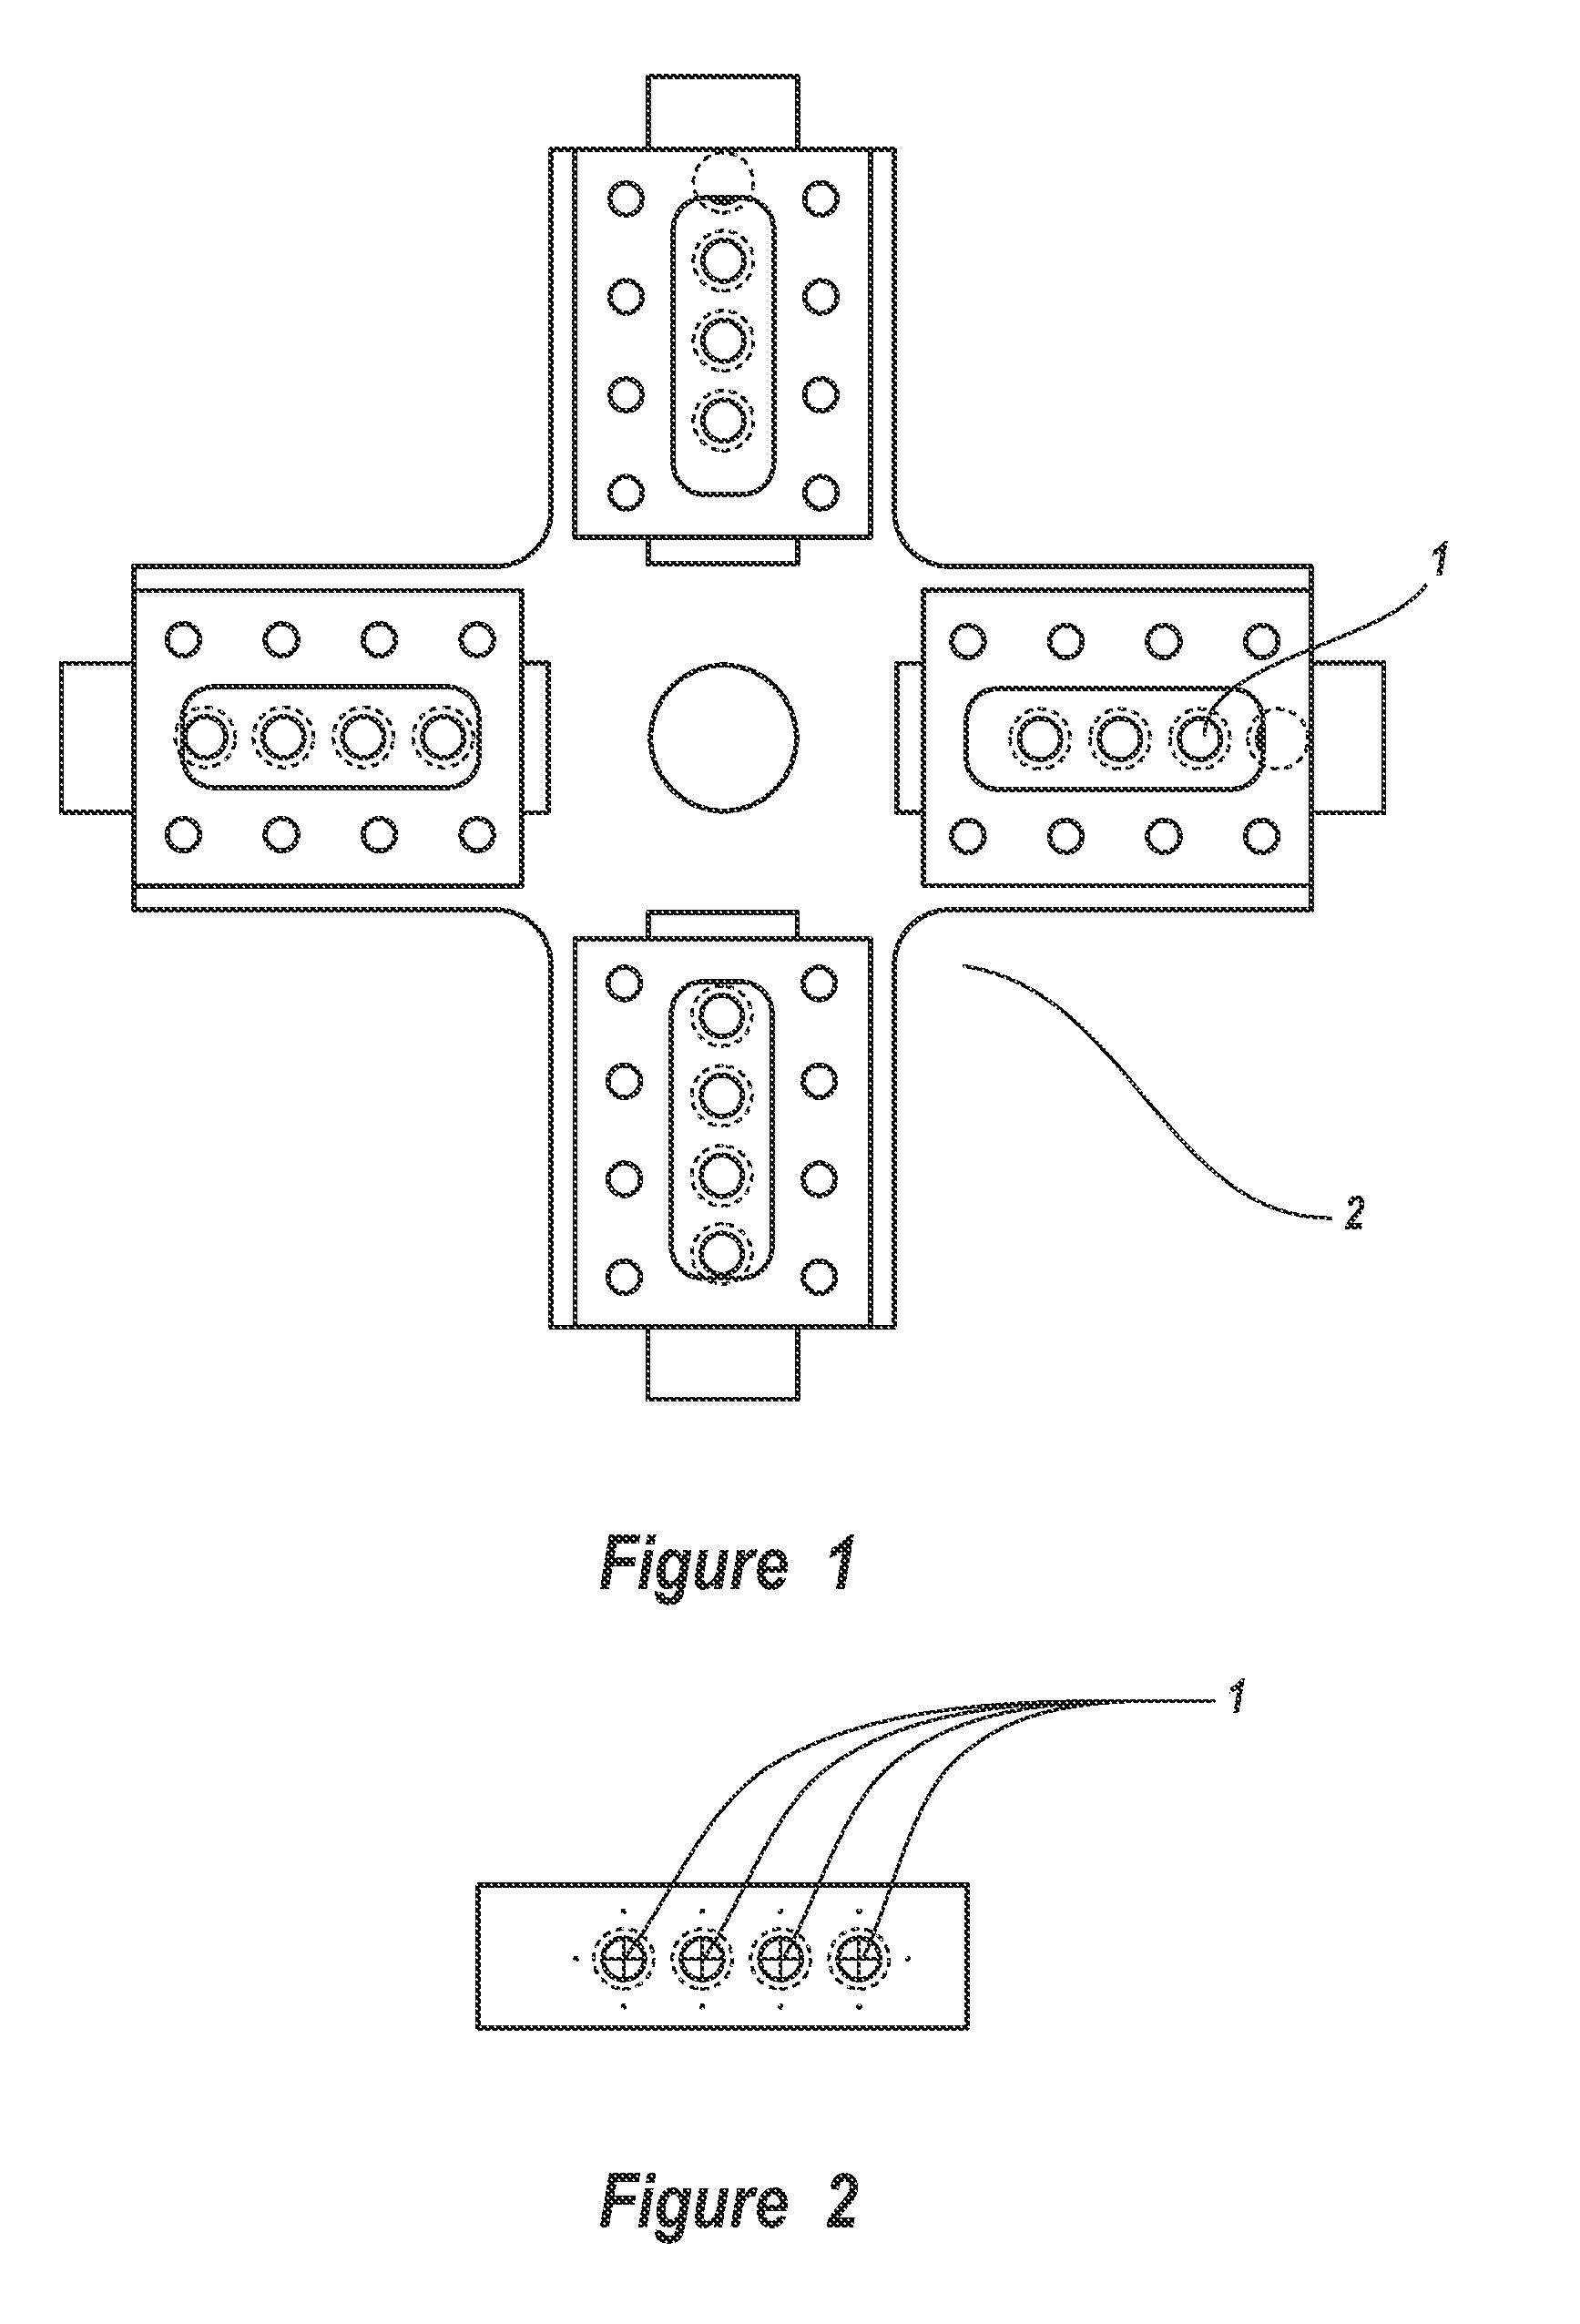 Disposable multiplex polymerase chain reaction (PCR) chip and device